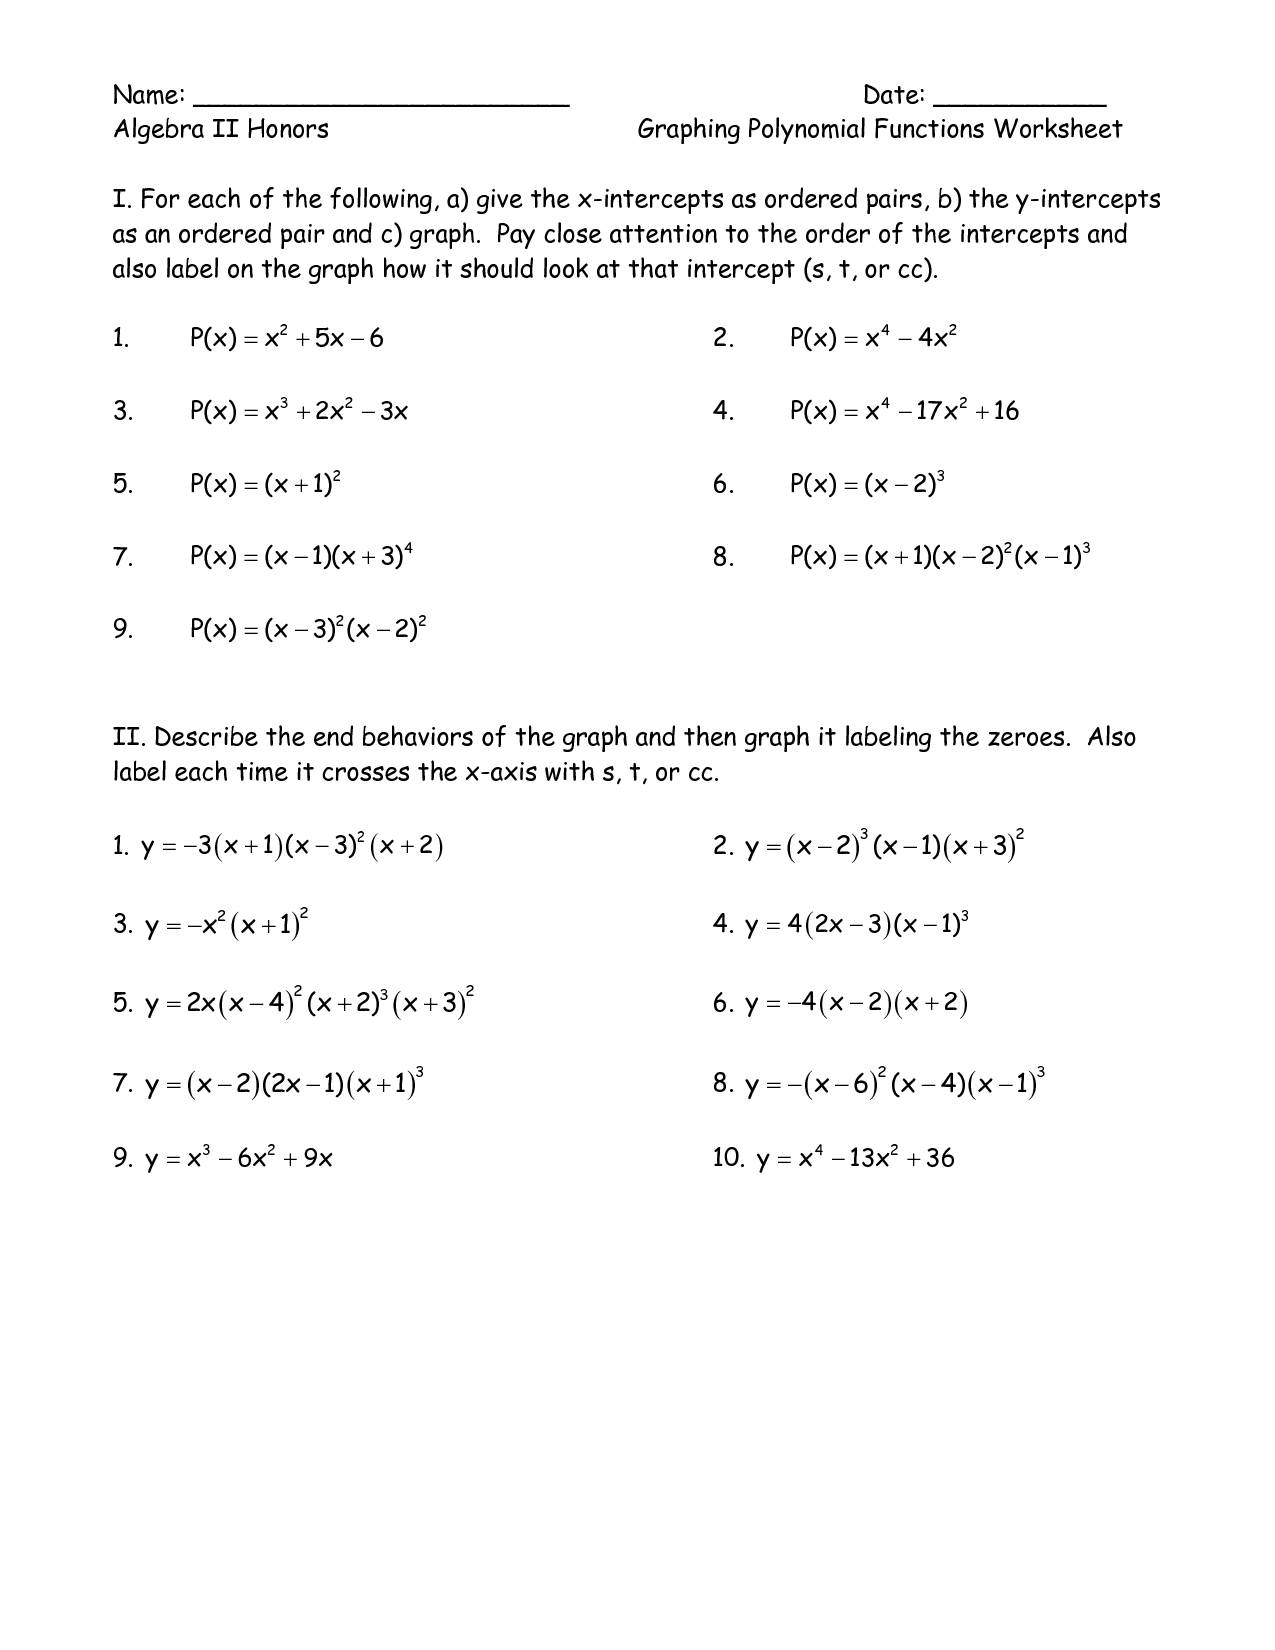 Graphing Polynomial Functions Worksheet With Answers Pdf